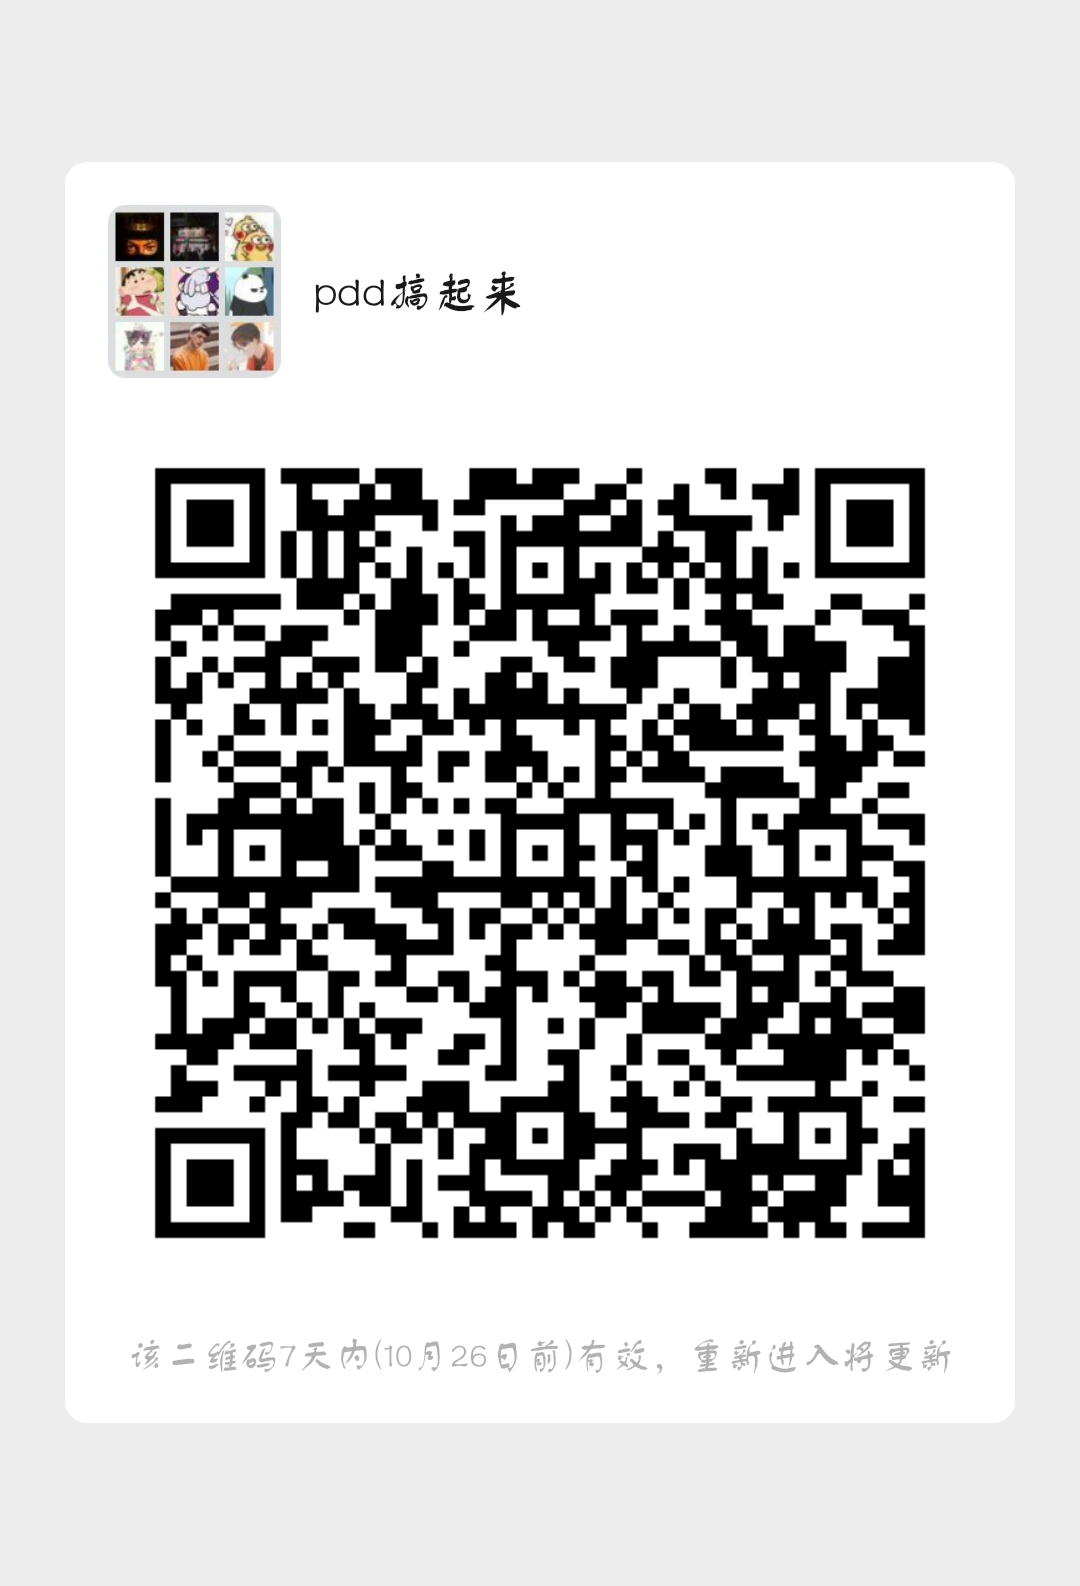 mmqrcode1603111979333.png